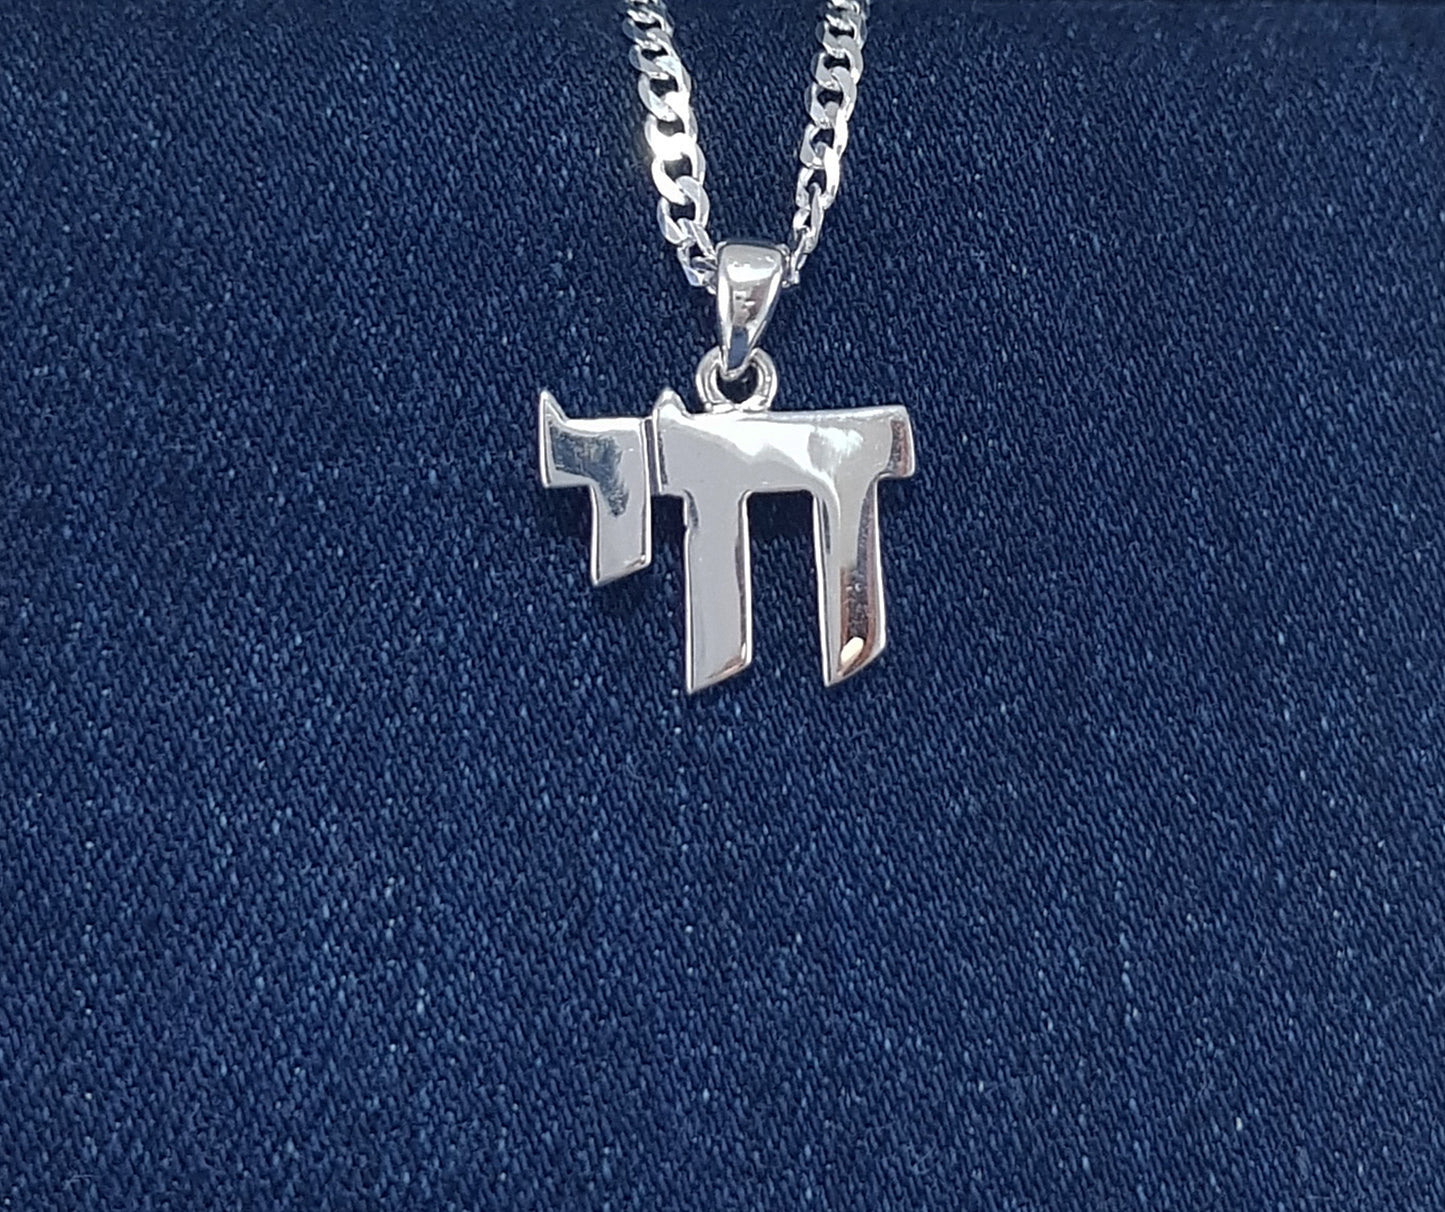 Sterling Silver Pendant with Hebrew Writing that says "life"